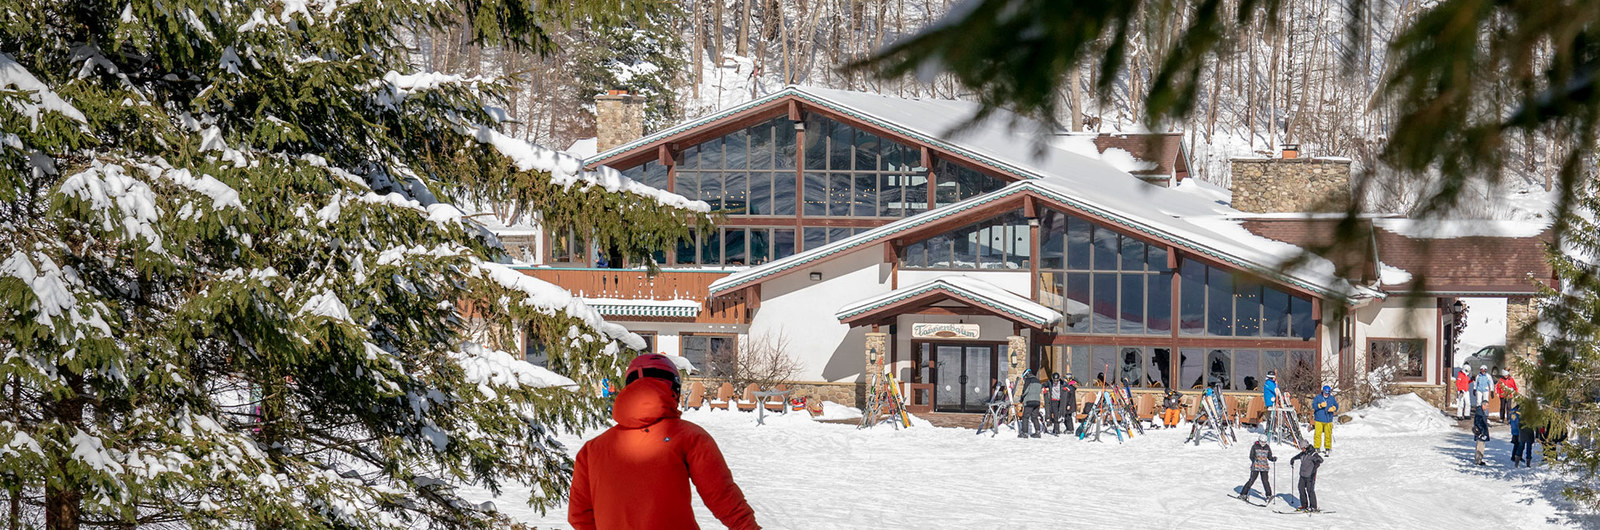 Ski lodge during winter day at Holiday Valley